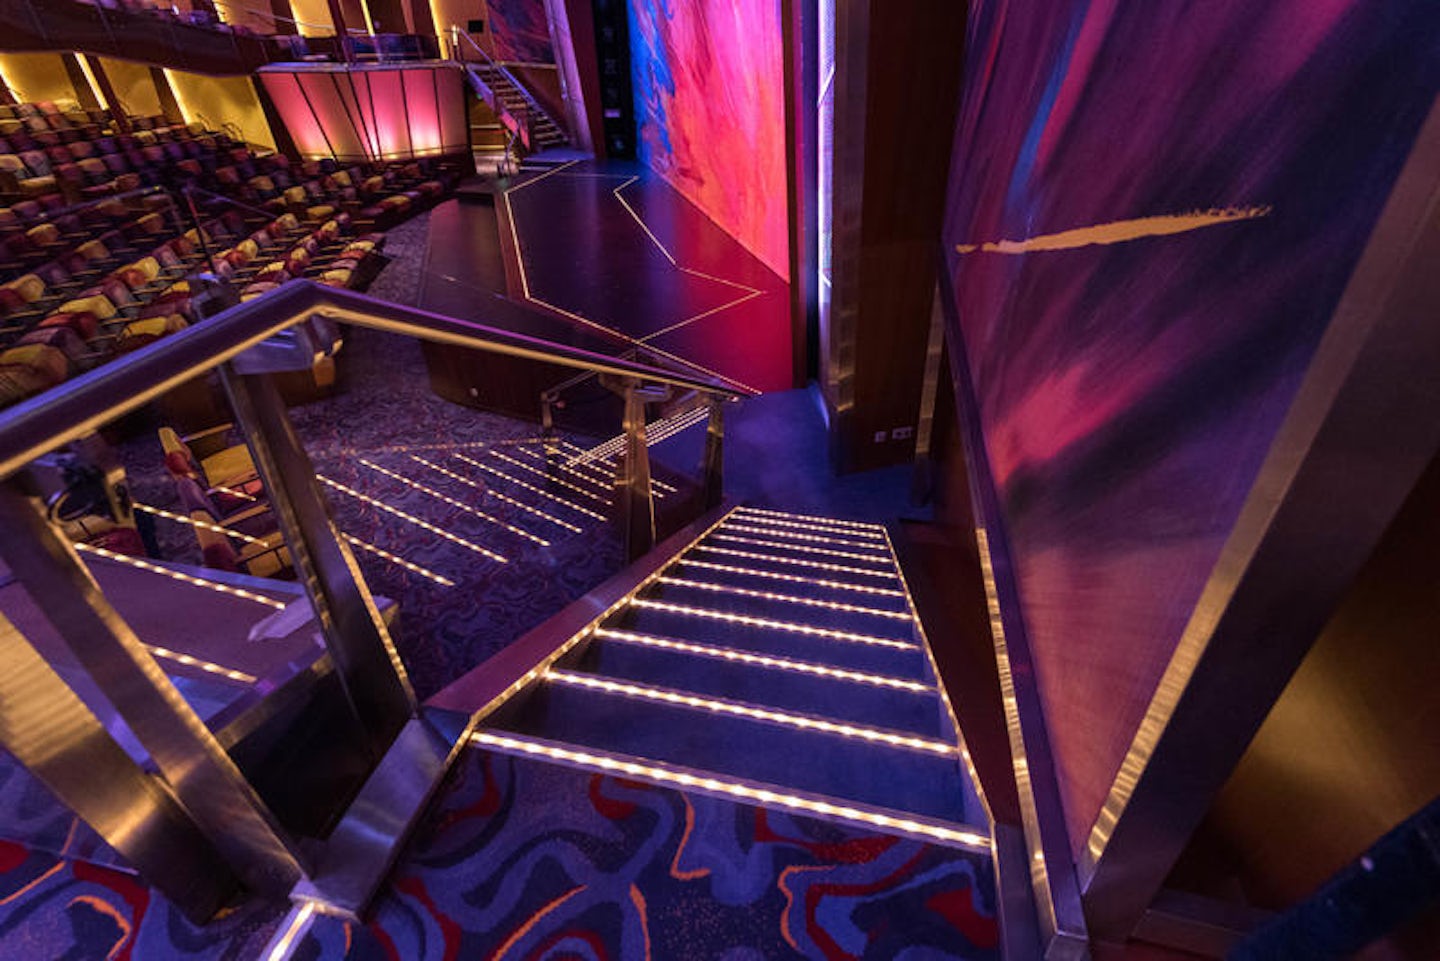 Pacifica Theater on Brilliance of the Seas